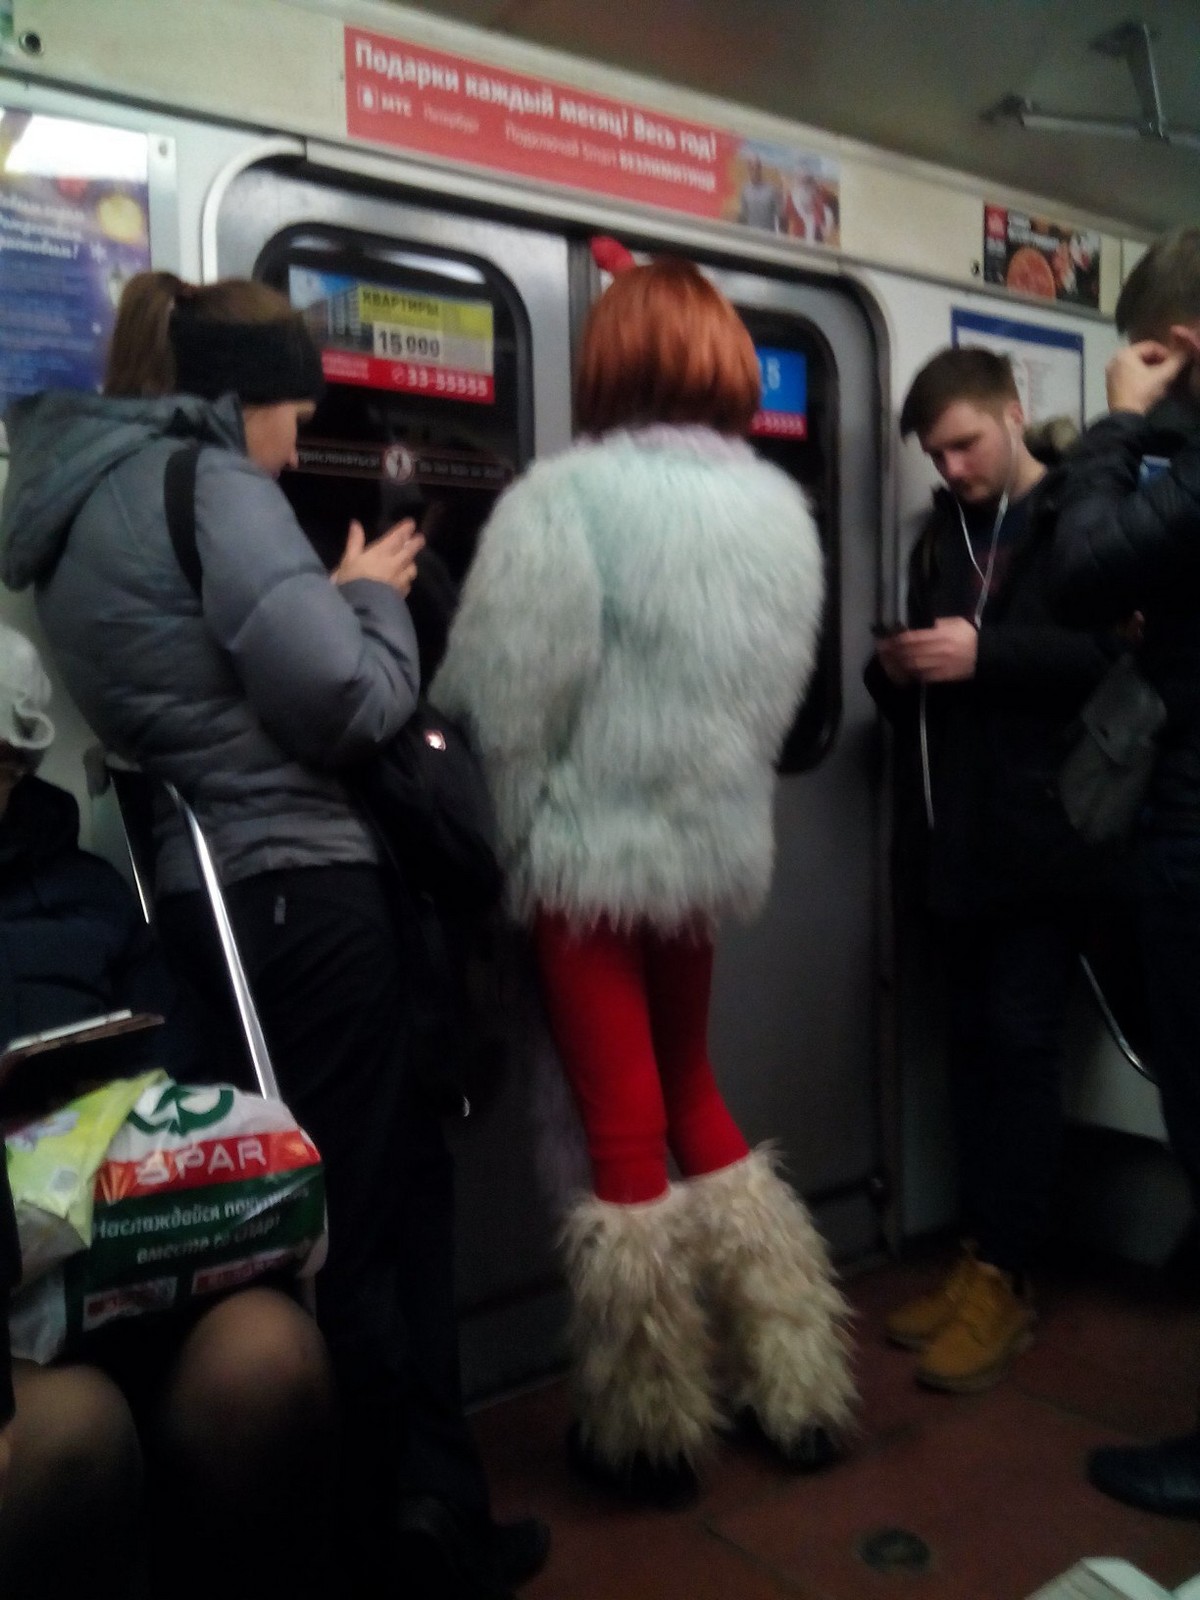 Strange People In The Subway, part 19